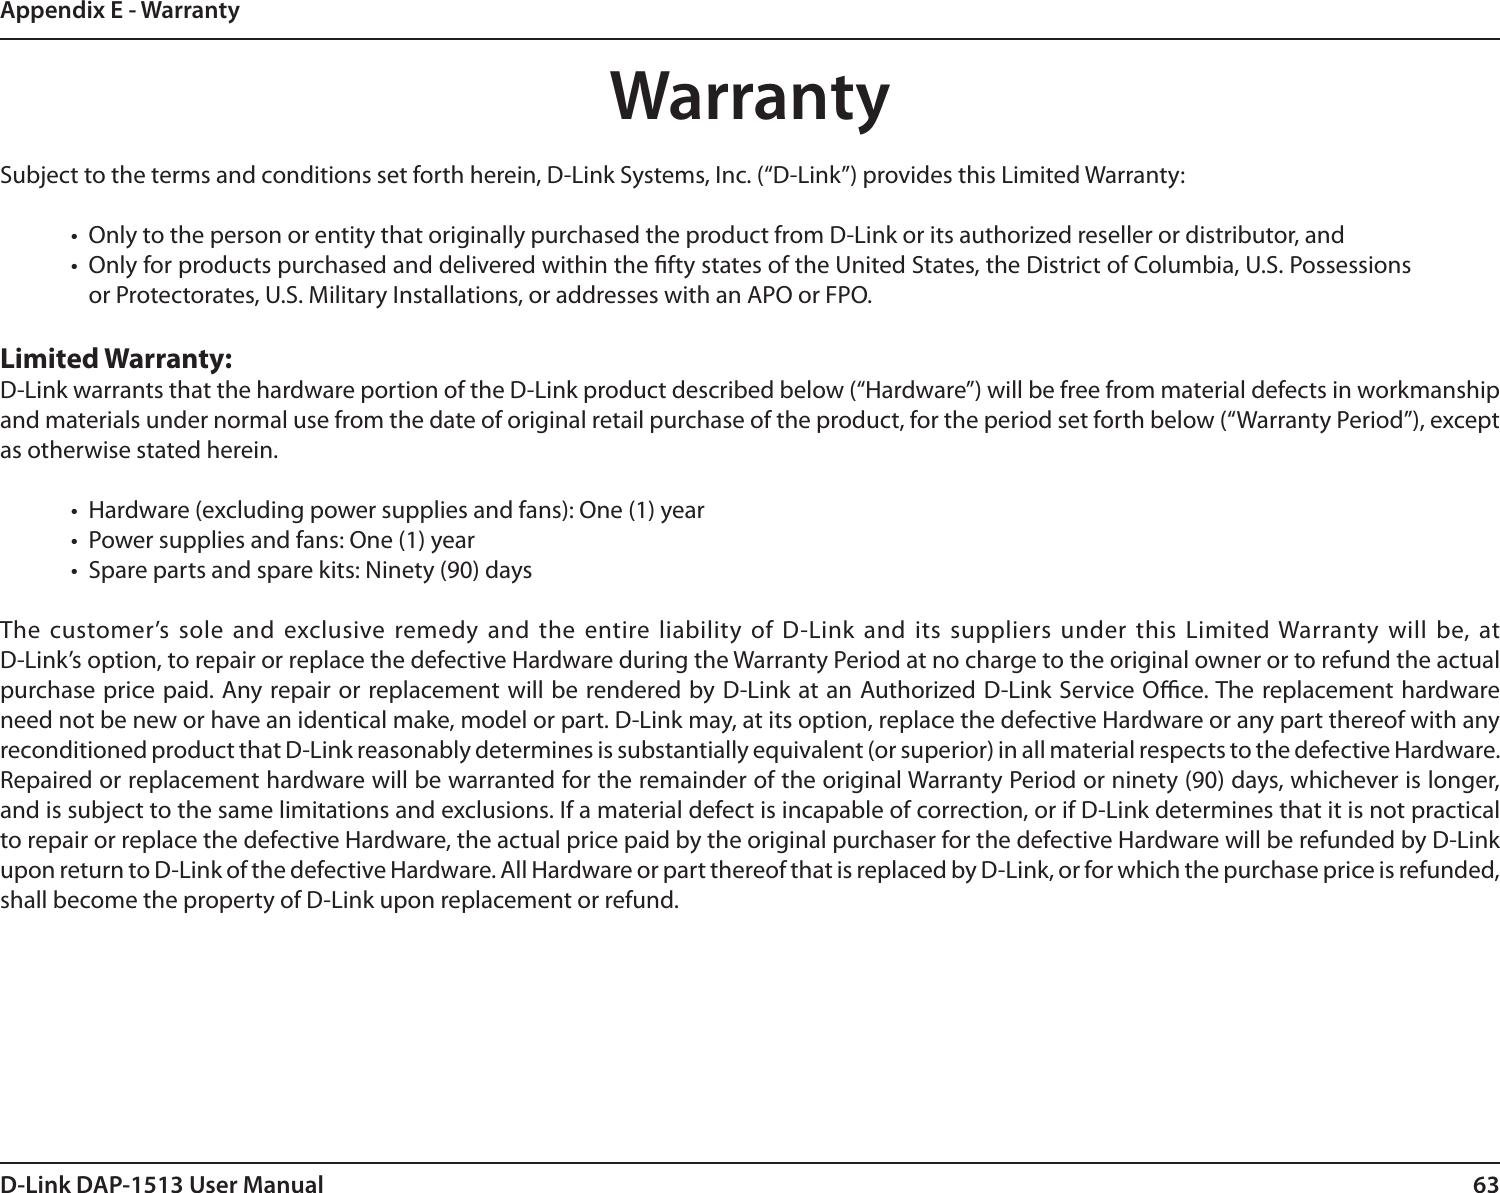 63D-Link DAP-1513 User ManualAppendix E - WarrantyWarrantySubject to the terms and conditions set forth herein, D-Link Systems, Inc. (“D-Link”) provides this Limited Warranty:•  Only to the person or entity that originally purchased the product from D-Link or its authorized reseller or distributor, and•  Only for products purchased and delivered within the fty states of the United States, the District of Columbia, U.S. Possessions or Protectorates, U.S. Military Installations, or addresses with an APO or FPO.Limited Warranty:D-Link warrants that the hardware portion of the D-Link product described below (“Hardware”) will be free from material defects in workmanship and materials under normal use from the date of original retail purchase of the product, for the period set forth below (“Warranty Period”), except as otherwise stated herein.•  Hardware (excluding power supplies and fans): One (1) year•  Power supplies and fans: One (1) year•  Spare parts and spare kits: Ninety (90) daysThe customer’s sole  and exclusive remedy and the entire liability of  D-Link  and its suppliers under  this Limited Warranty will  be, at  D-Link’s option, to repair or replace the defective Hardware during the Warranty Period at no charge to the original owner or to refund the actual purchase price paid. Any repair or replacement will be rendered by D-Link at an Authorized D-Link Service Oce. The replacement hardware need not be new or have an identical make, model or part. D-Link may, at its option, replace the defective Hardware or any part thereof with any reconditioned product that D-Link reasonably determines is substantially equivalent (or superior) in all material respects to the defective Hardware. Repaired or replacement hardware will be warranted for the remainder of the original Warranty Period or ninety (90) days, whichever is longer, and is subject to the same limitations and exclusions. If a material defect is incapable of correction, or if D-Link determines that it is not practical to repair or replace the defective Hardware, the actual price paid by the original purchaser for the defective Hardware will be refunded by D-Link upon return to D-Link of the defective Hardware. All Hardware or part thereof that is replaced by D-Link, or for which the purchase price is refunded, shall become the property of D-Link upon replacement or refund.